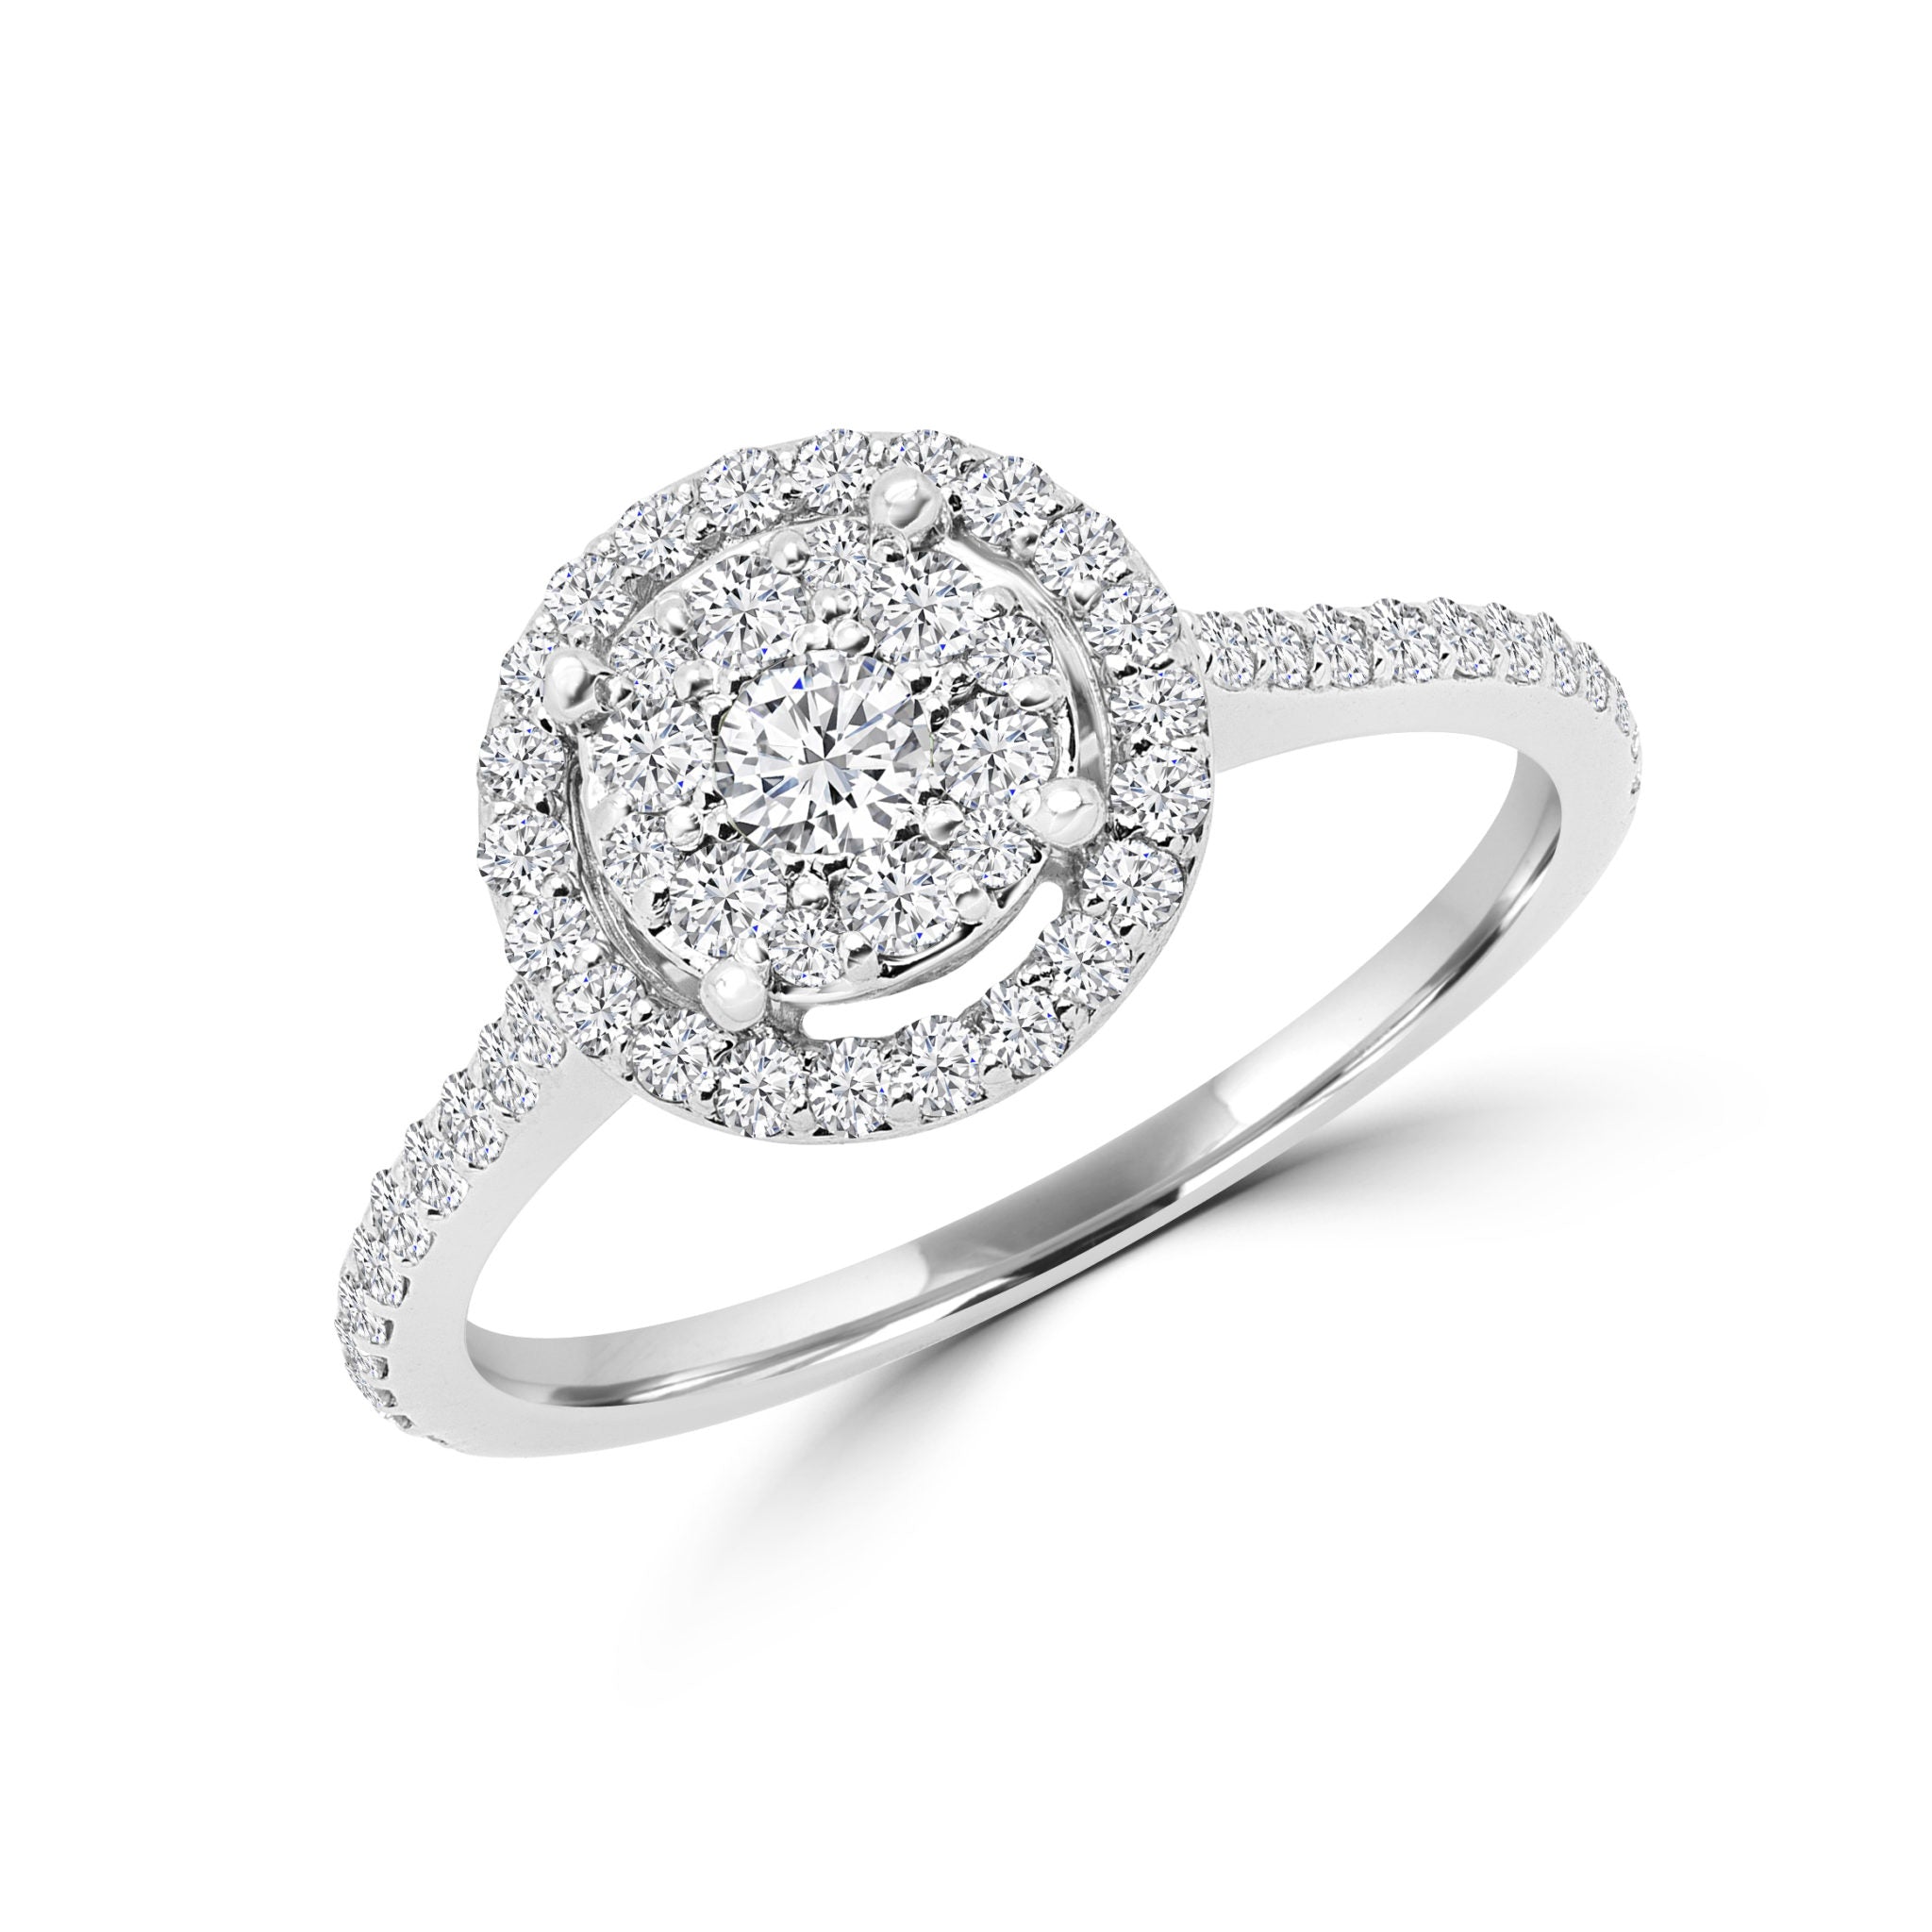 Gorgeous diamond halo engagement ring 0.70 (ctw) in 14k gold